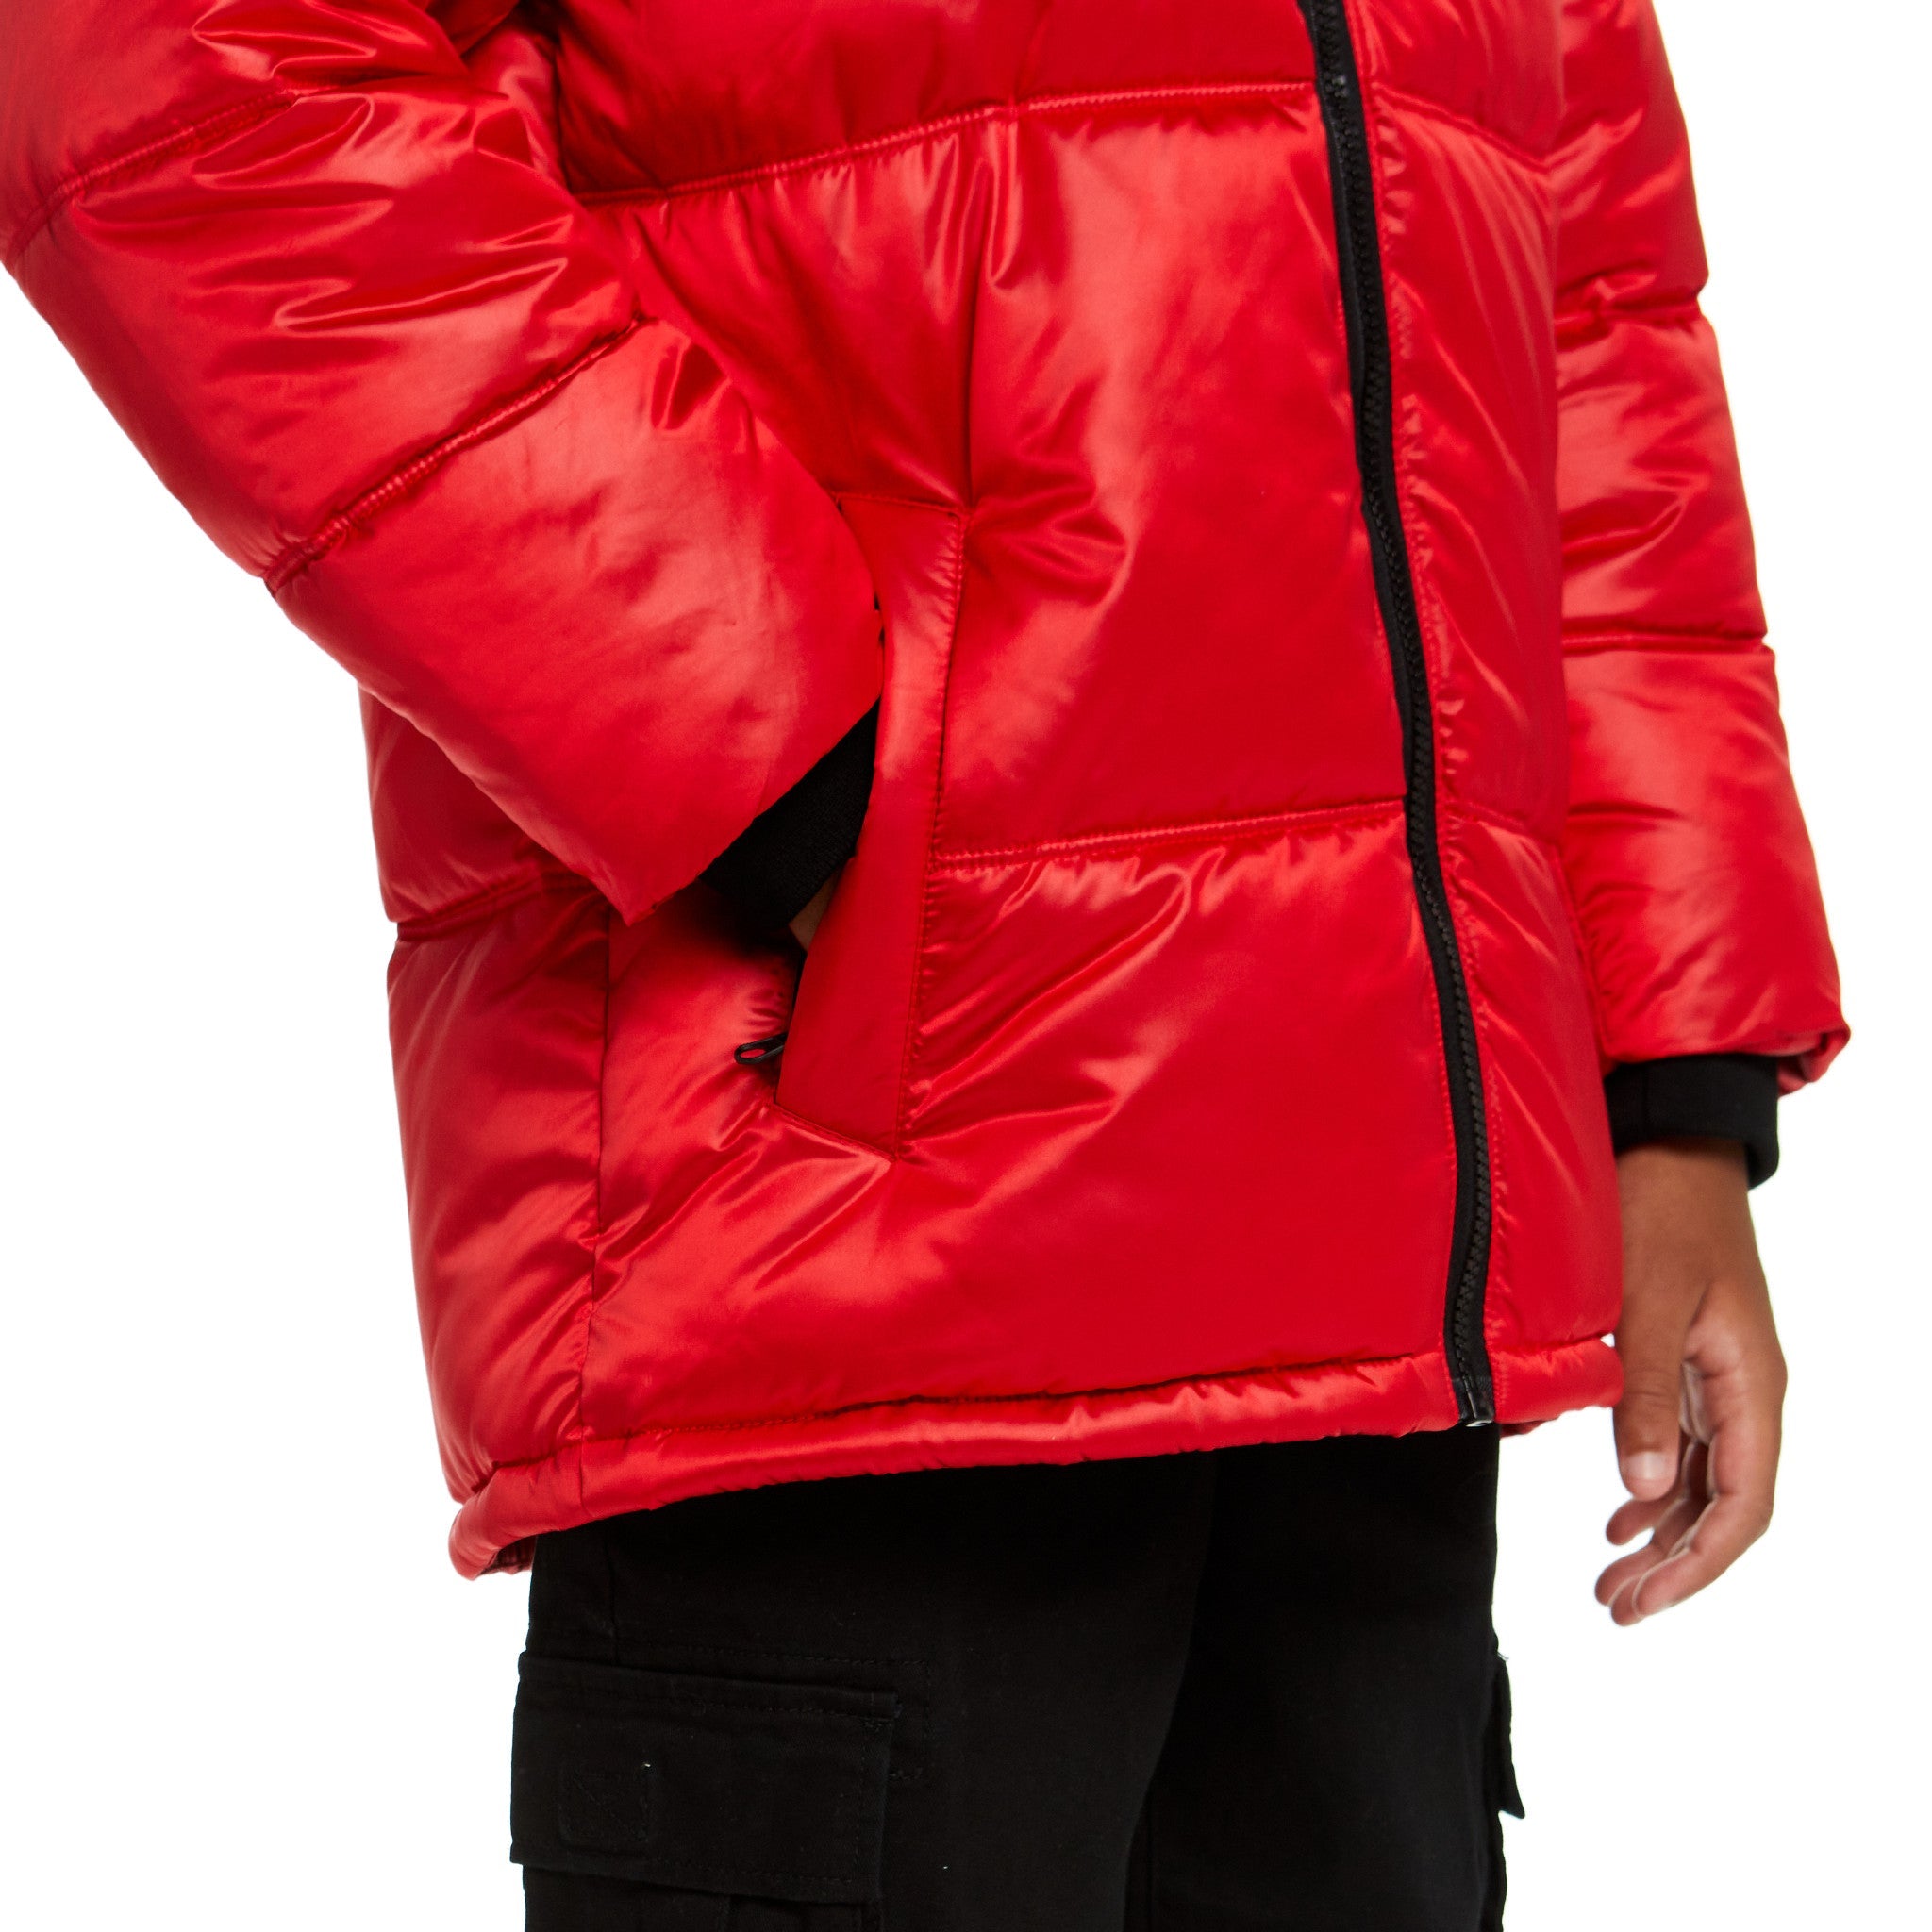 SPACEONE x Andy & Evan® | Galactic Puffer Jacket | Mars Red